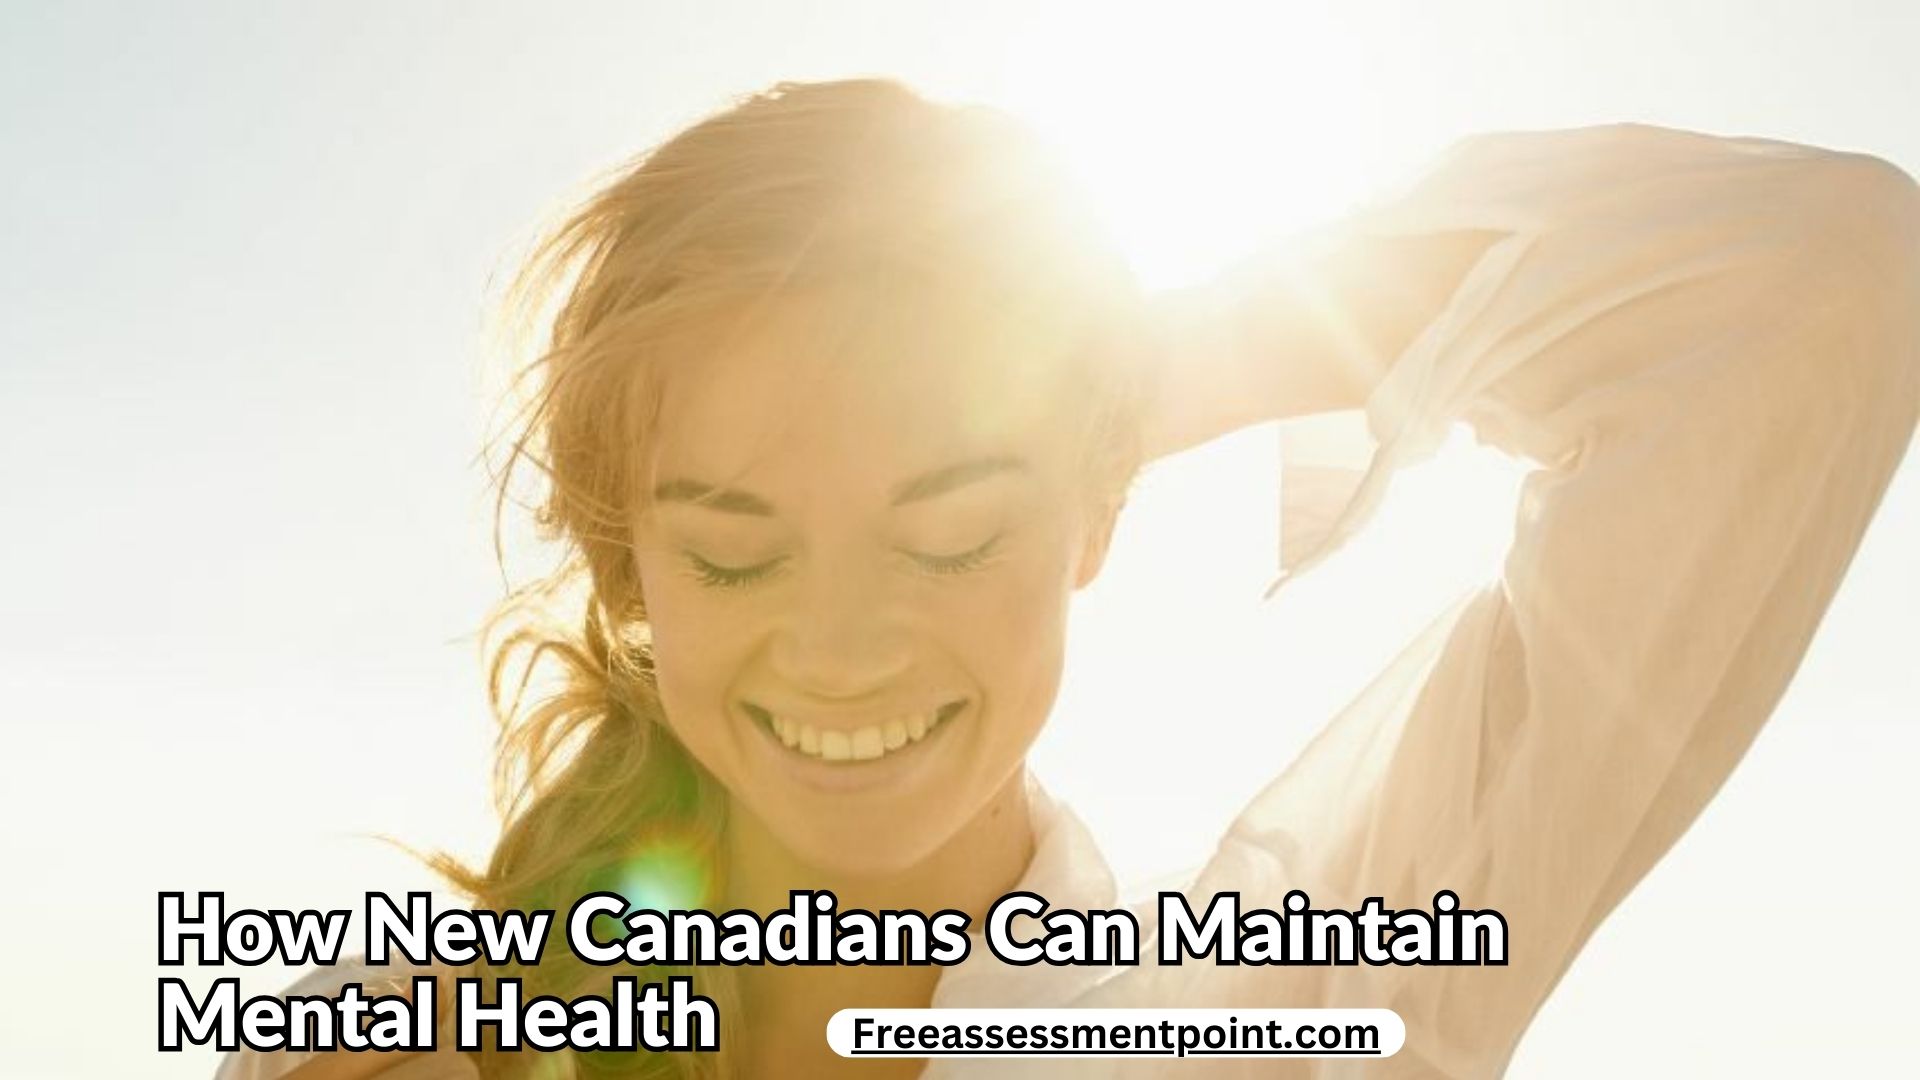 How New Canadians Can Maintain Mental Health